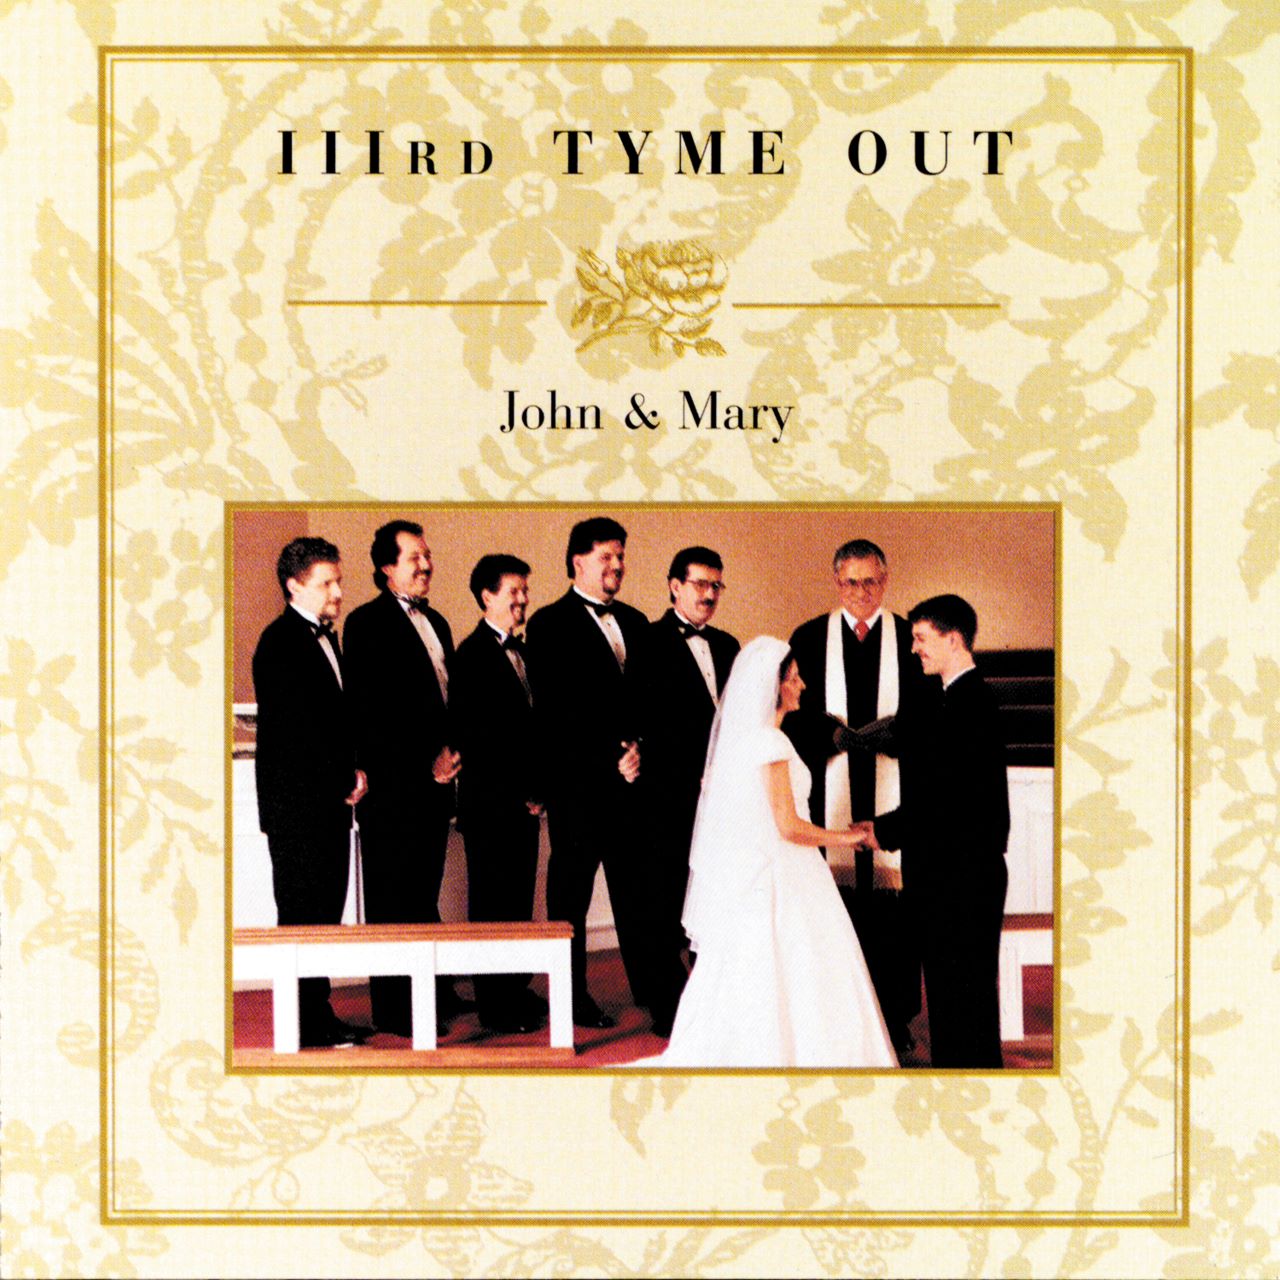 IIIrd Tyme Out - John and Mary cover album